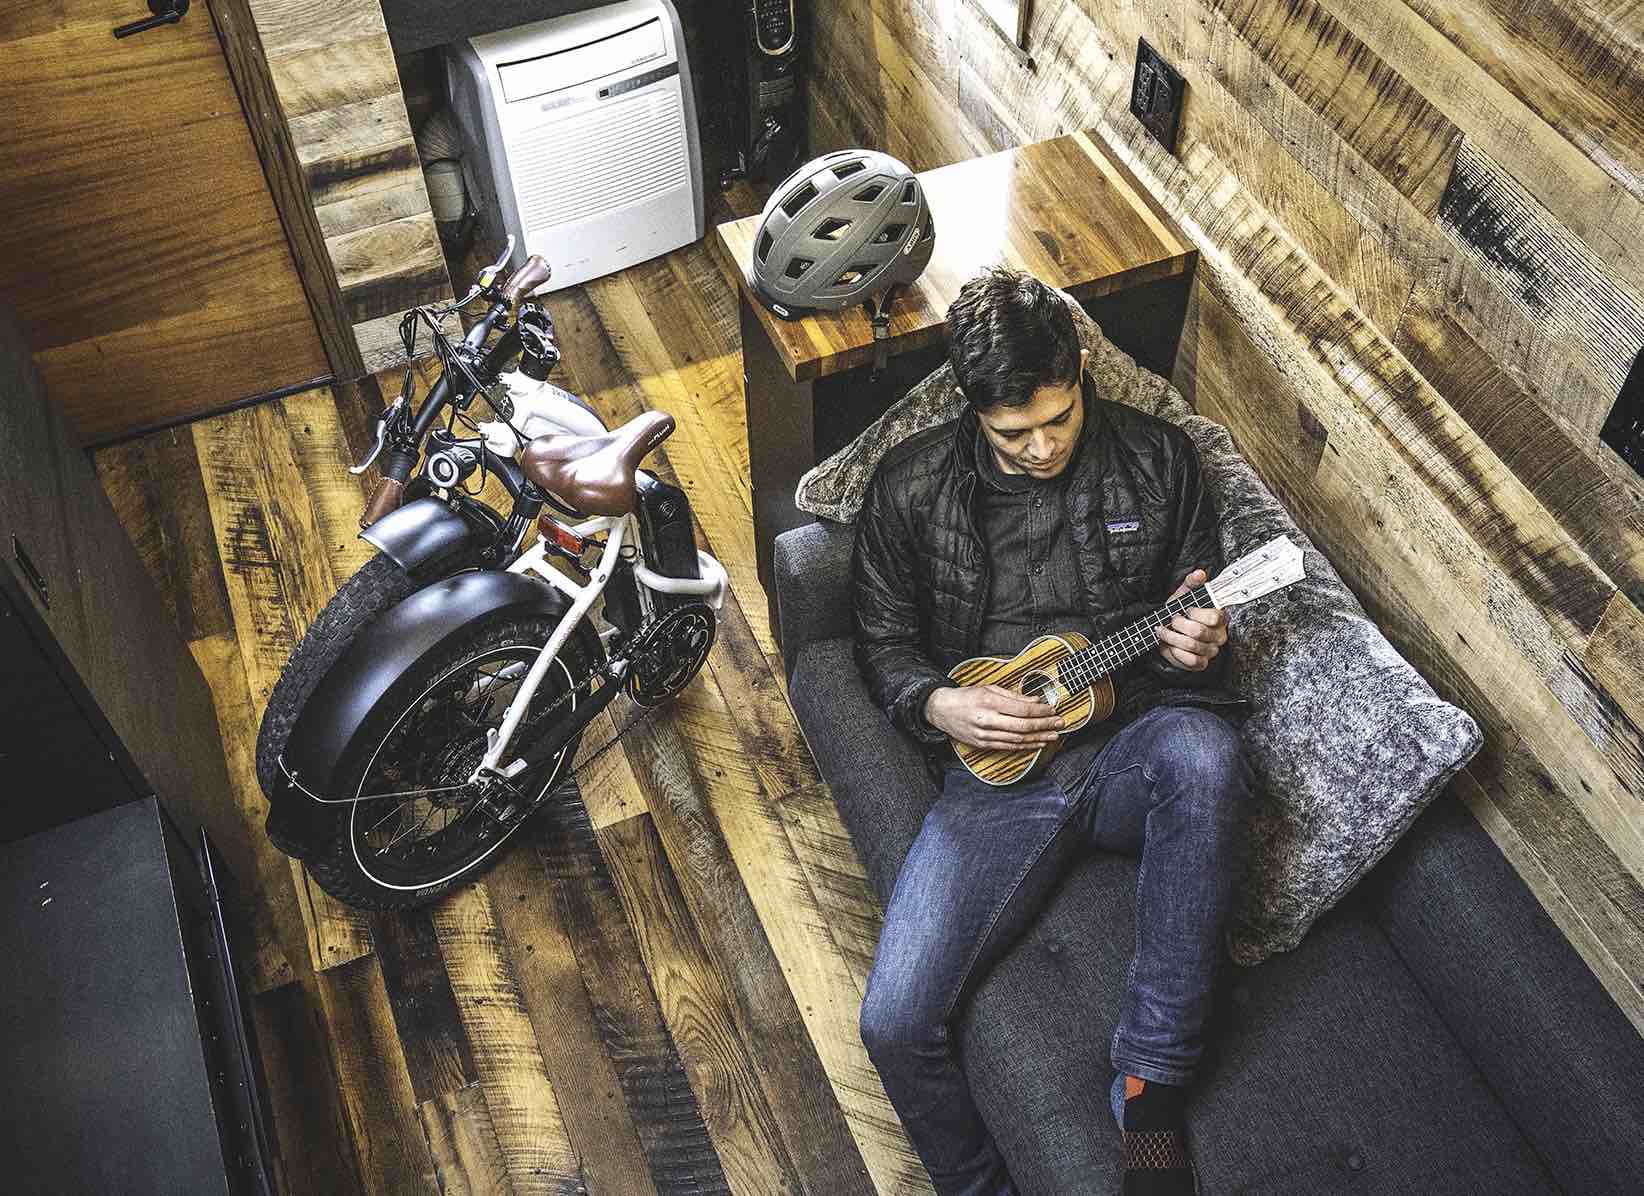 A college student plays a ukulele on a couch next to a folded up RadMini